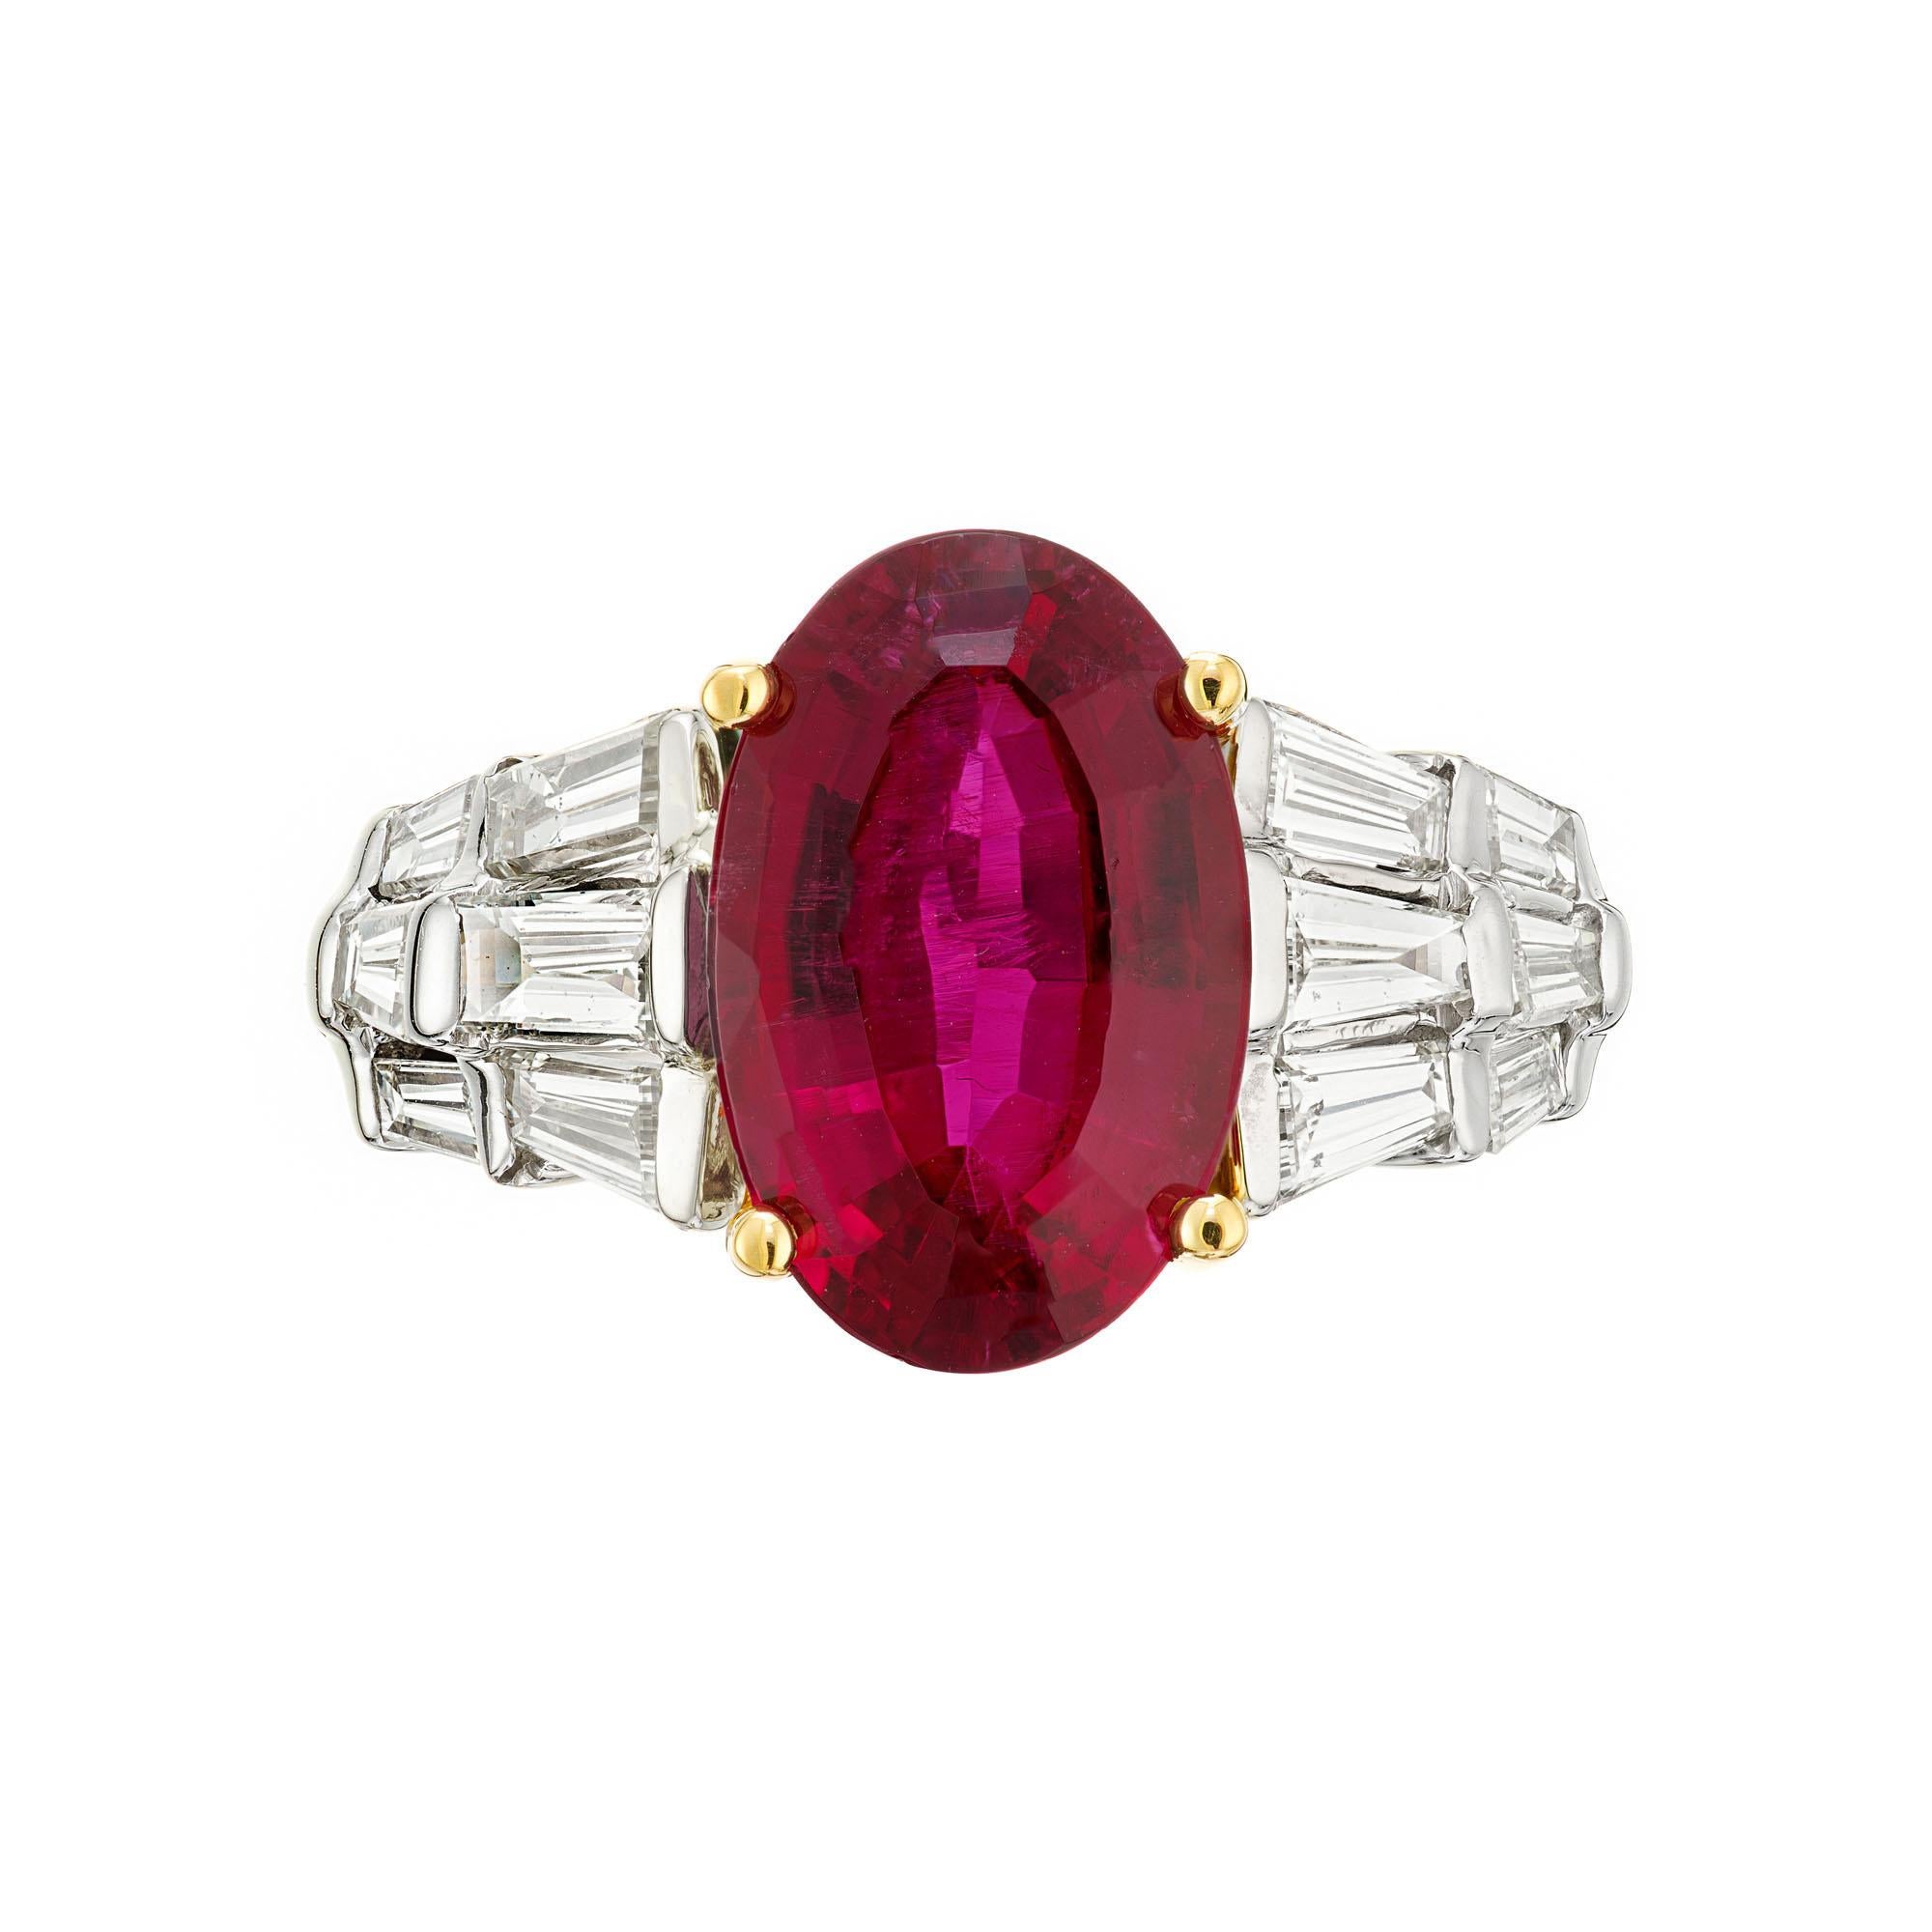 Bright red Rubelite Tourmaline and diamond cocktail engagement ring. Original 1950s GIA certified natural oval Rubelite Tourmaline center stone with straight and tapered baguette side diamonds in a 14k white and 18k yellow gold setting.  

1 oval